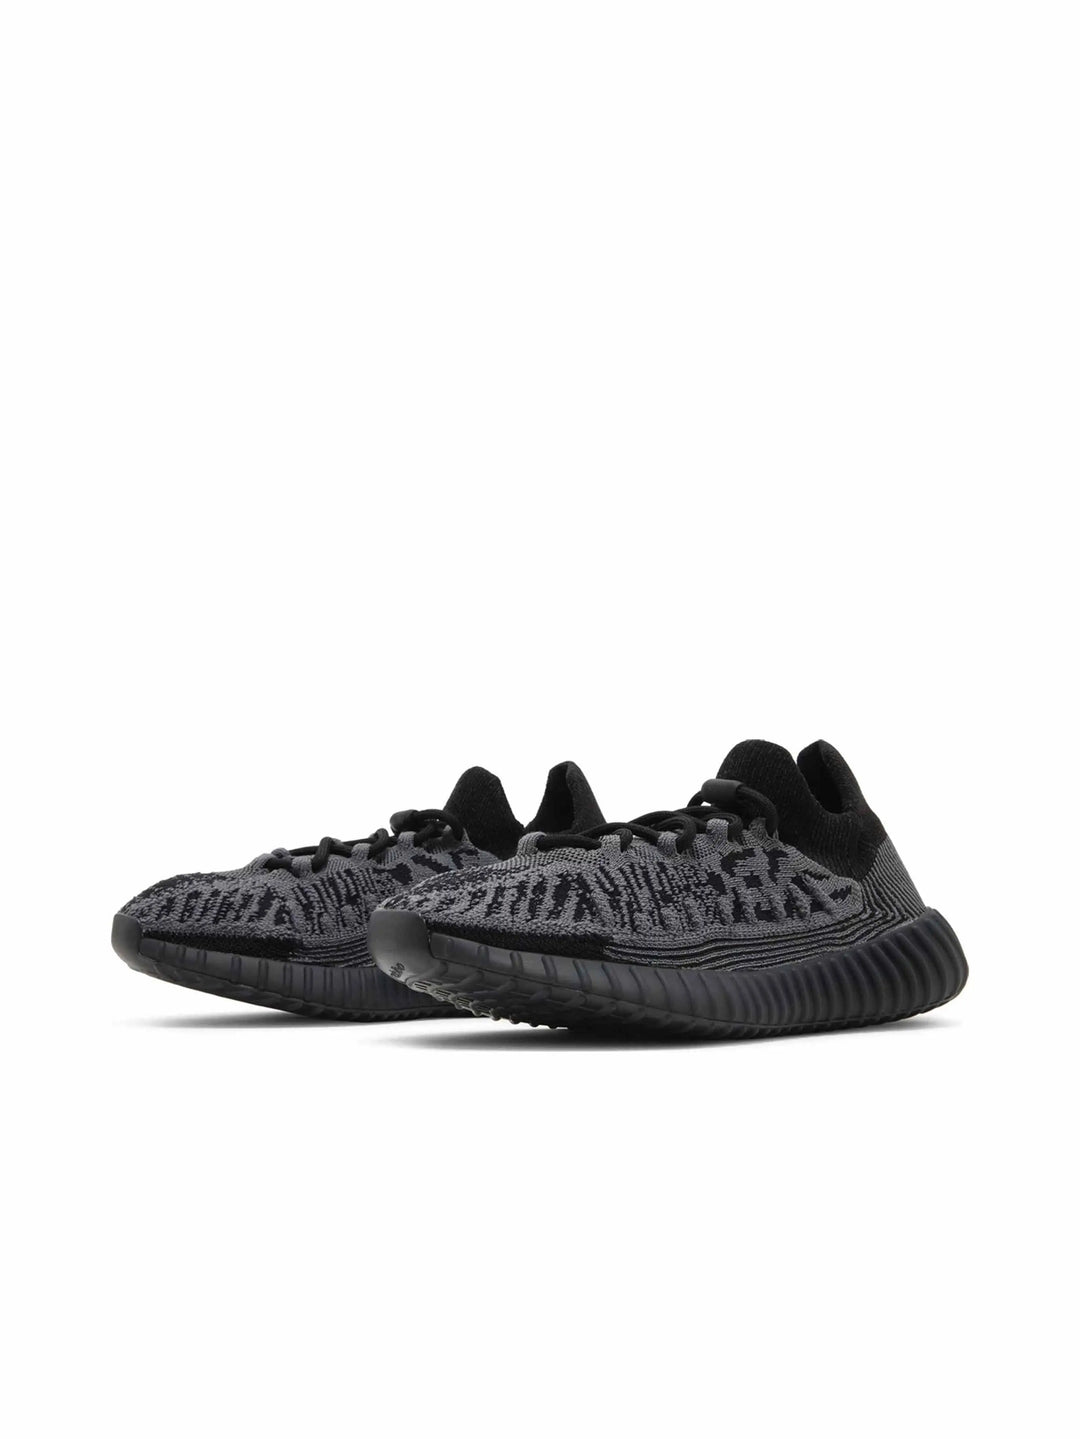 adidas Yeezy 350 V2 CMPCT Slate Onyx in Auckland, New Zealand - Shop name